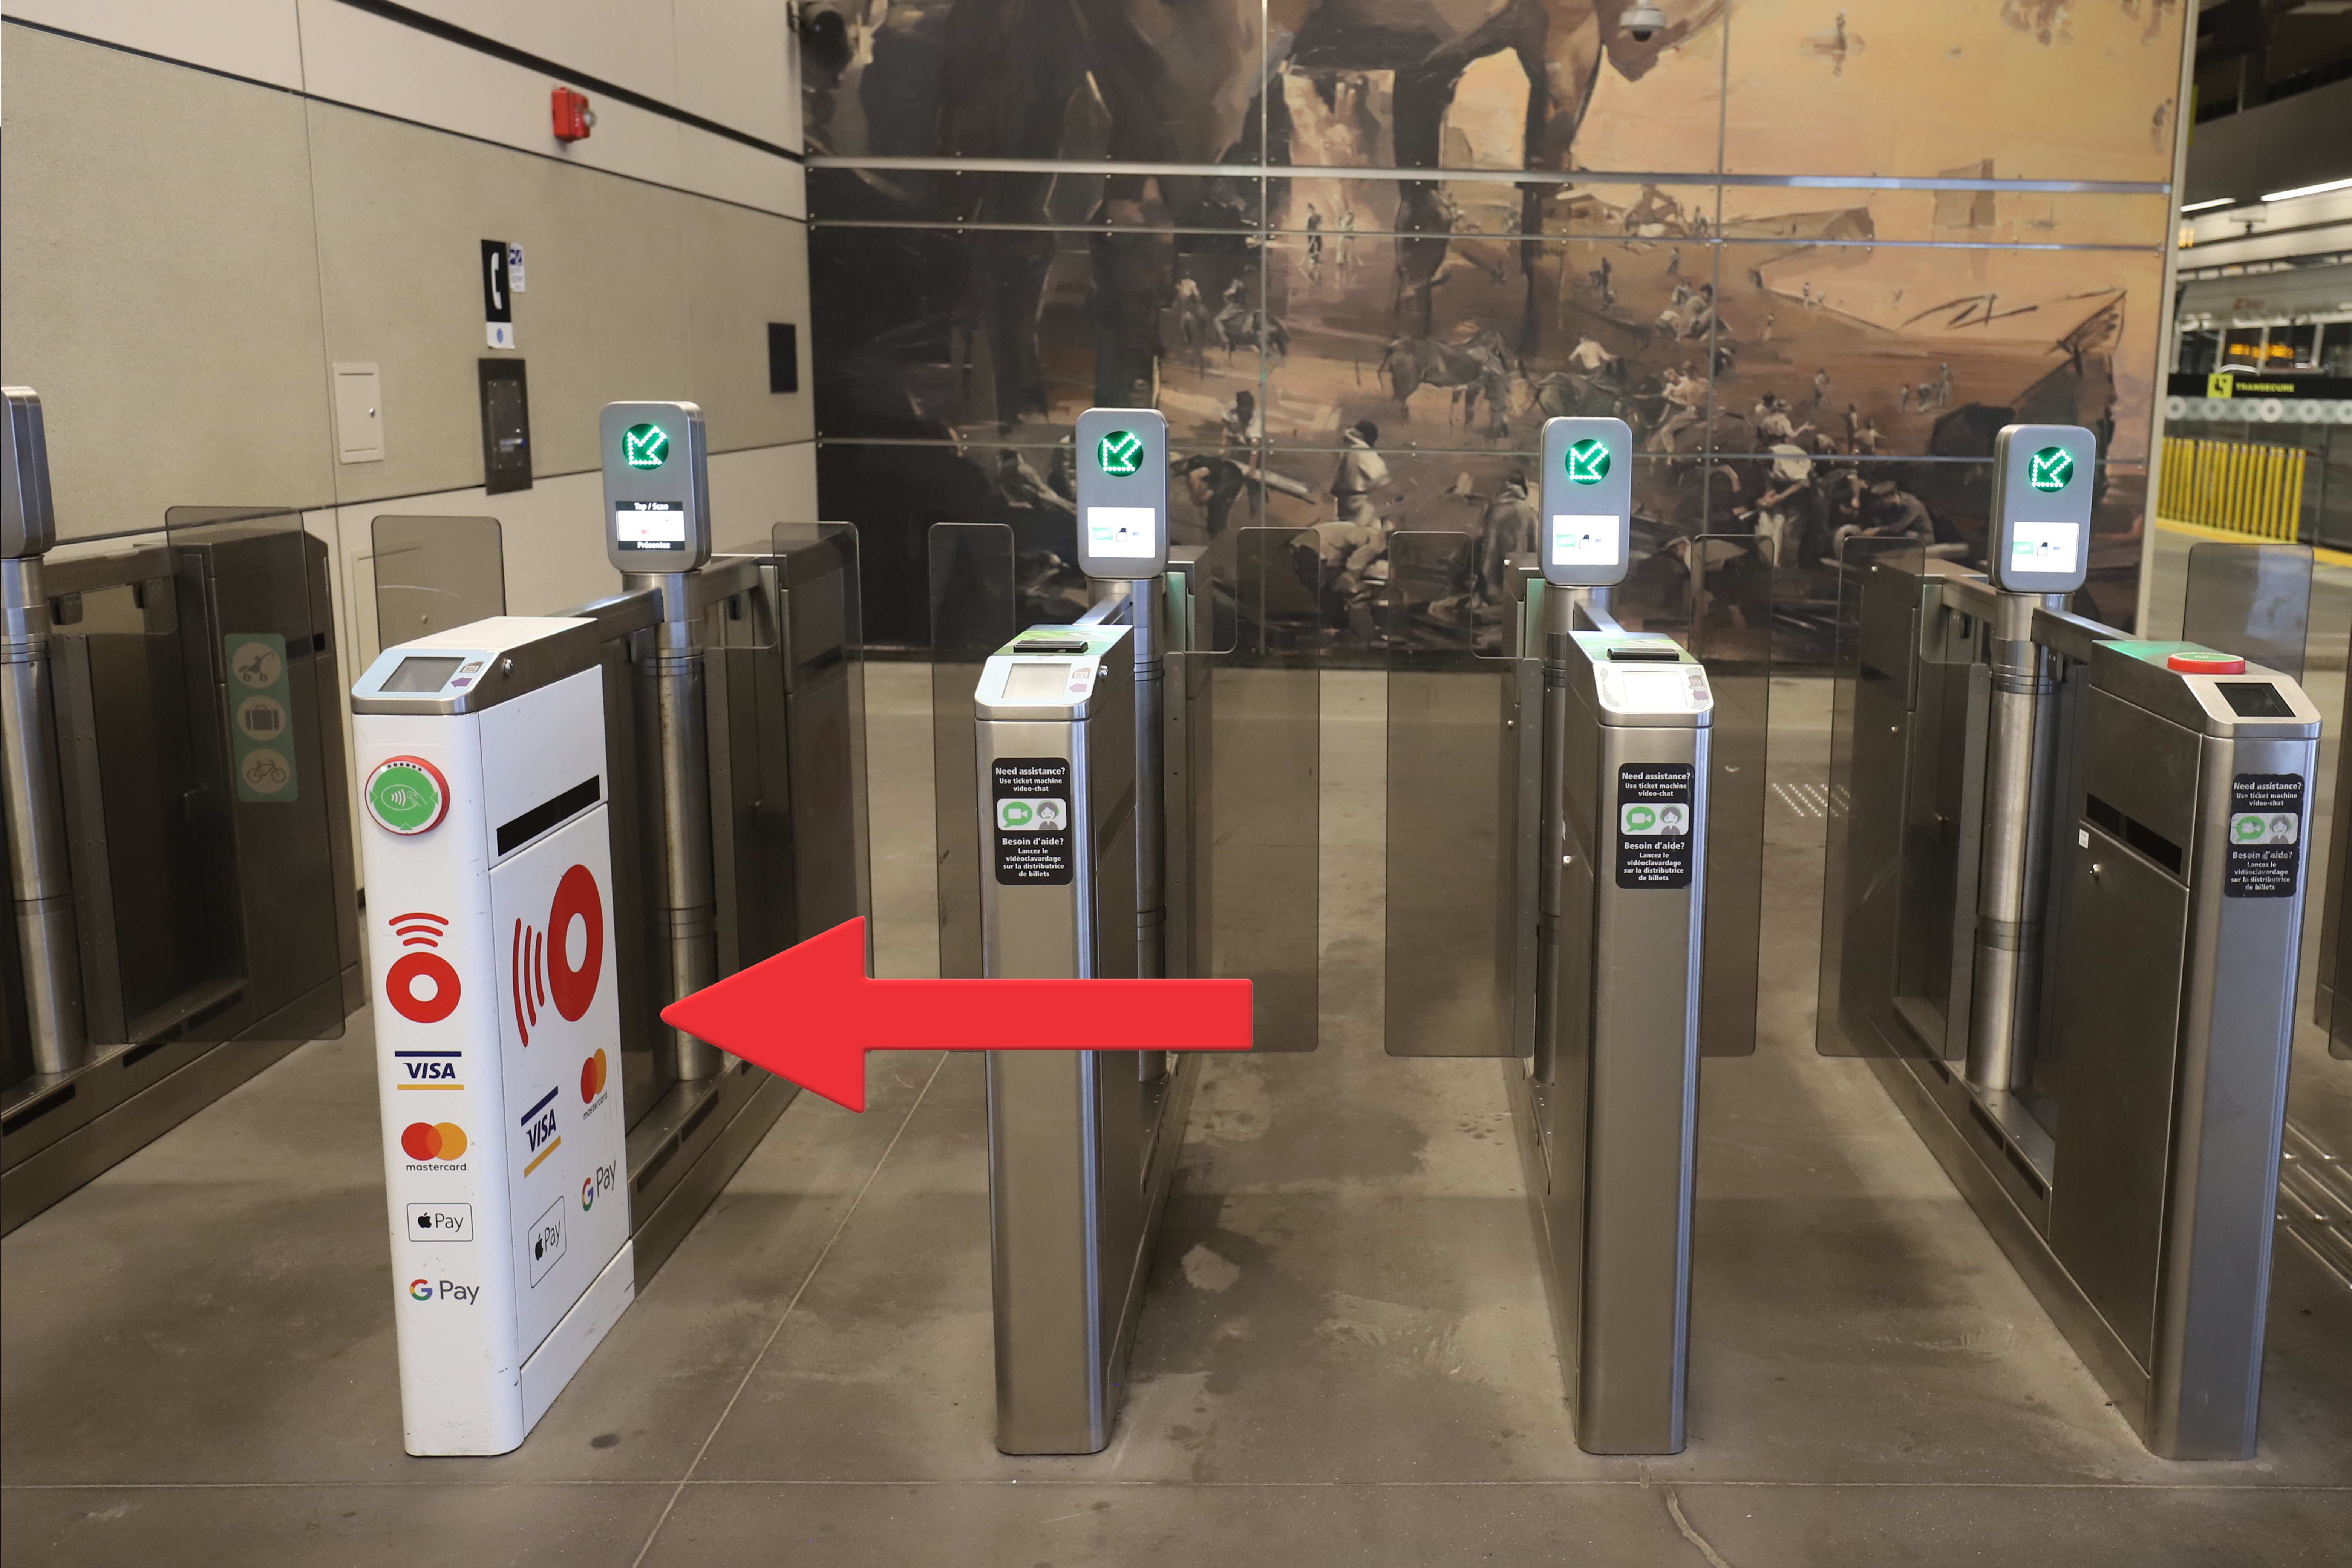 Look for the specially marked white fare gates which have already been activated to accept credit card and mobile phone taps.